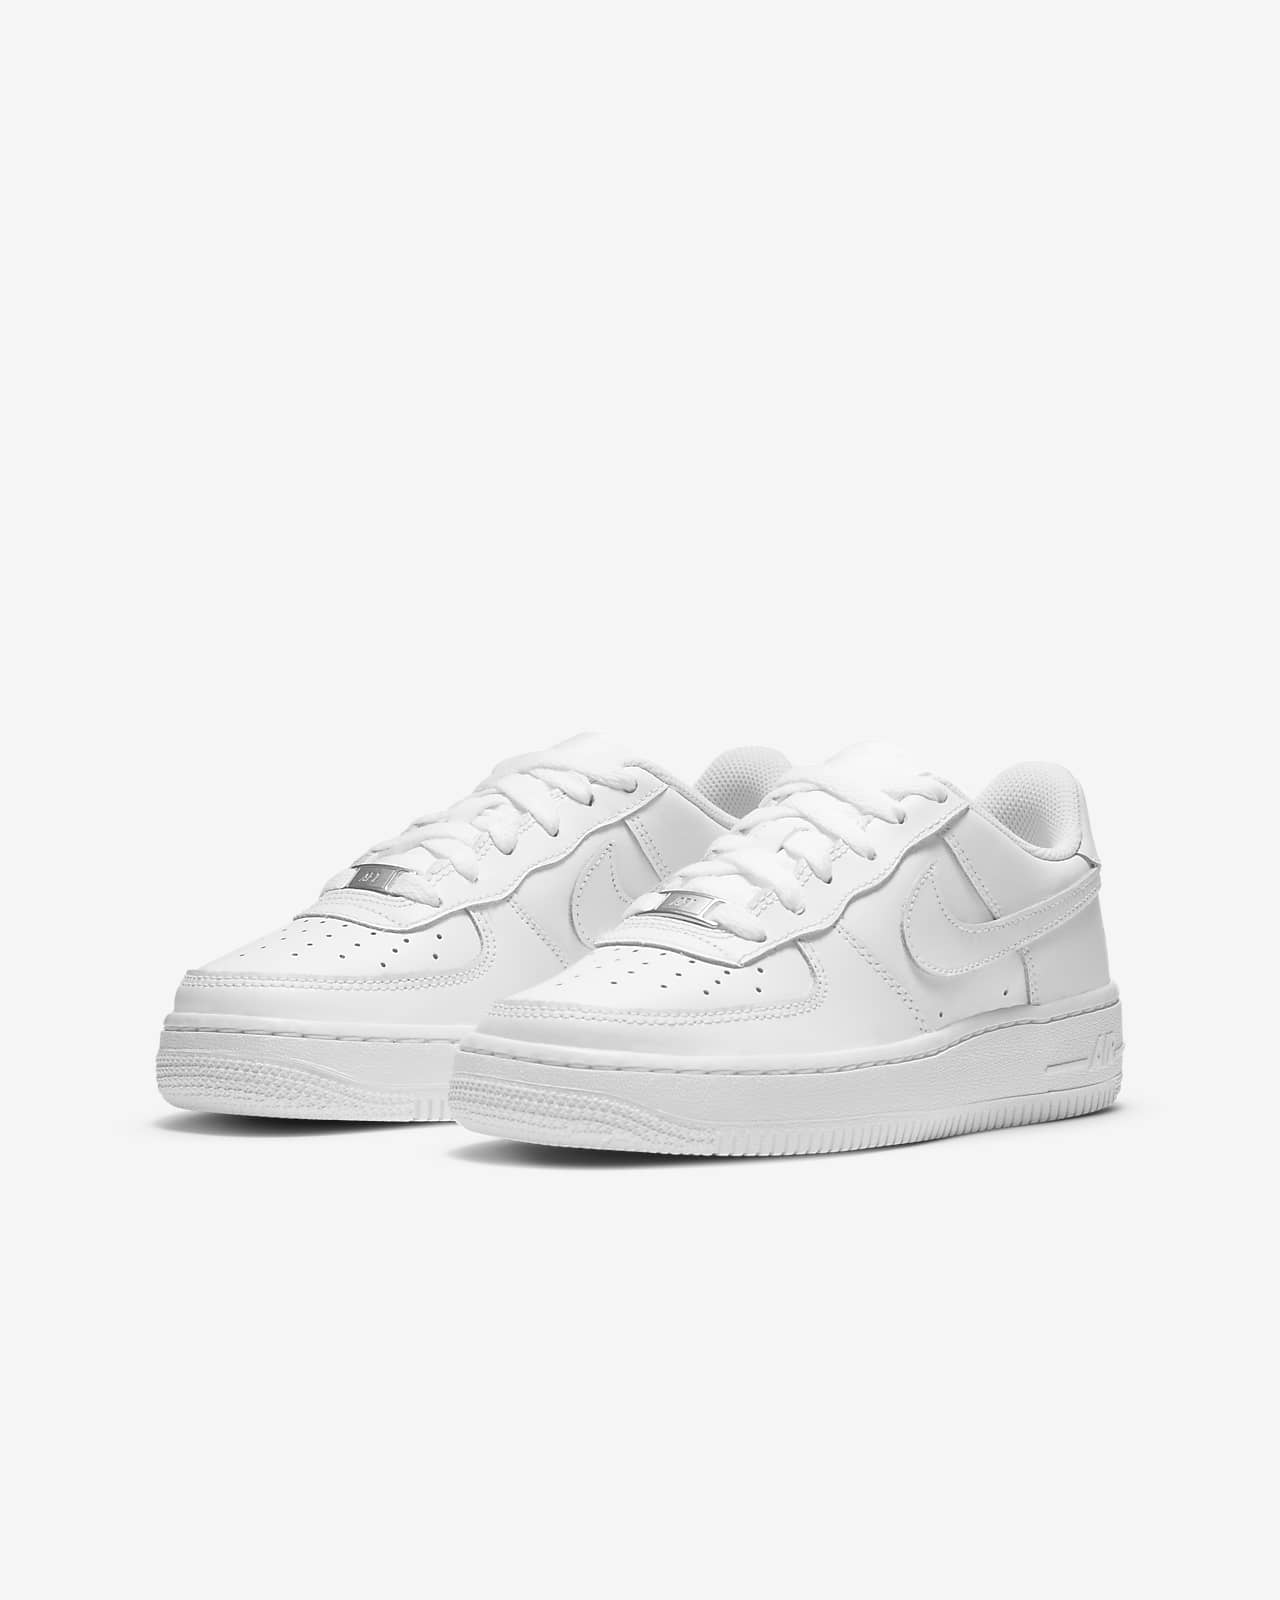 nike air force 1 size 4.5